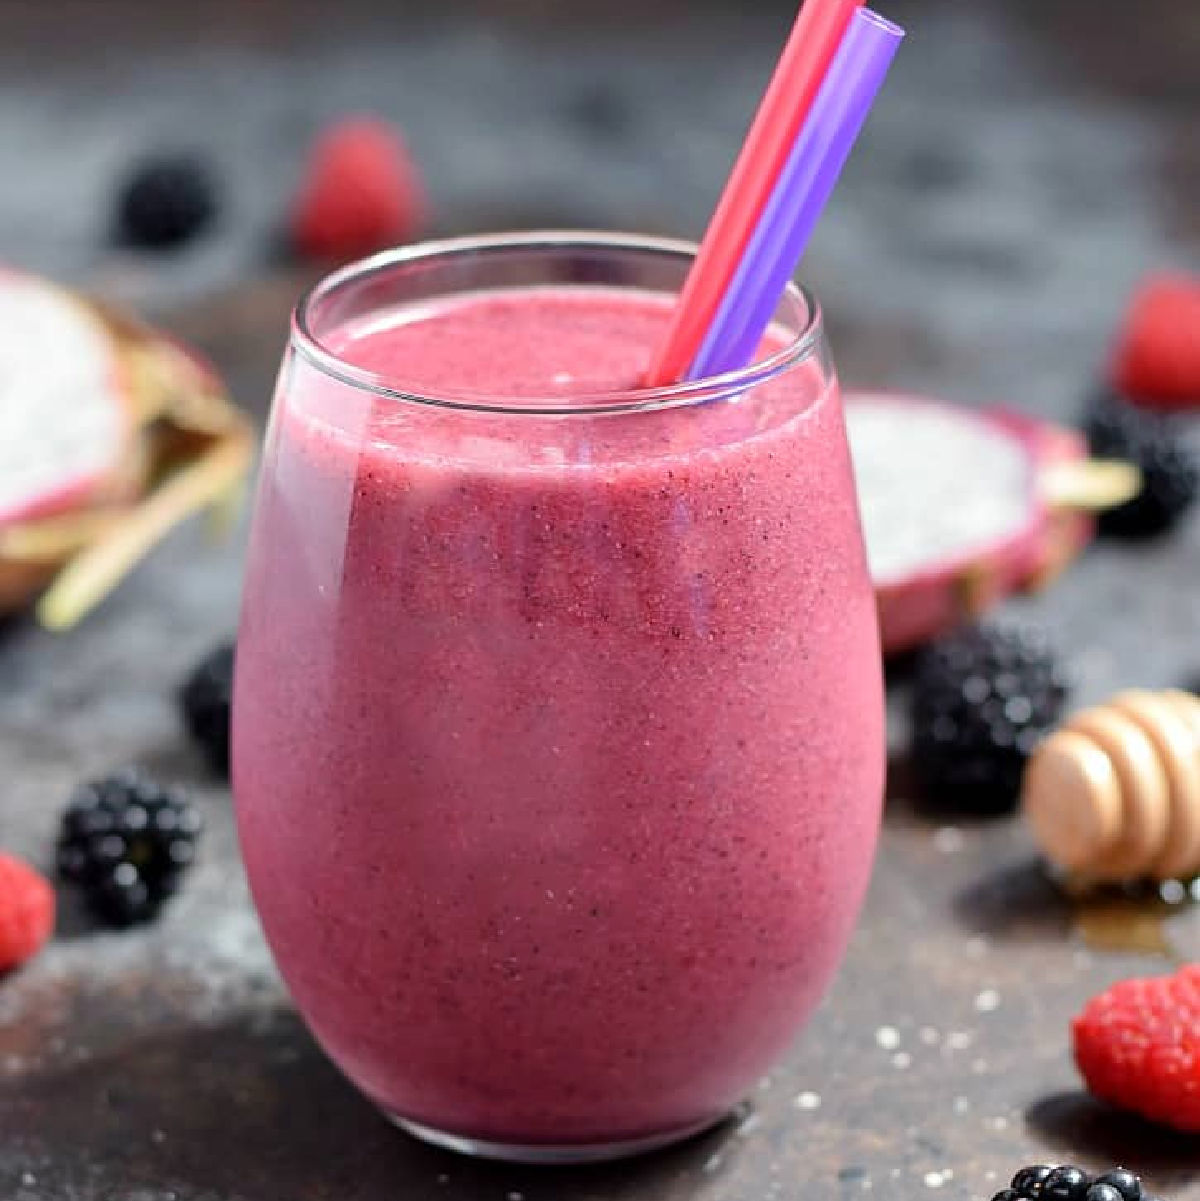 Bright pink dragon fruit smoothie in a small glass surrounded by fresh berries.